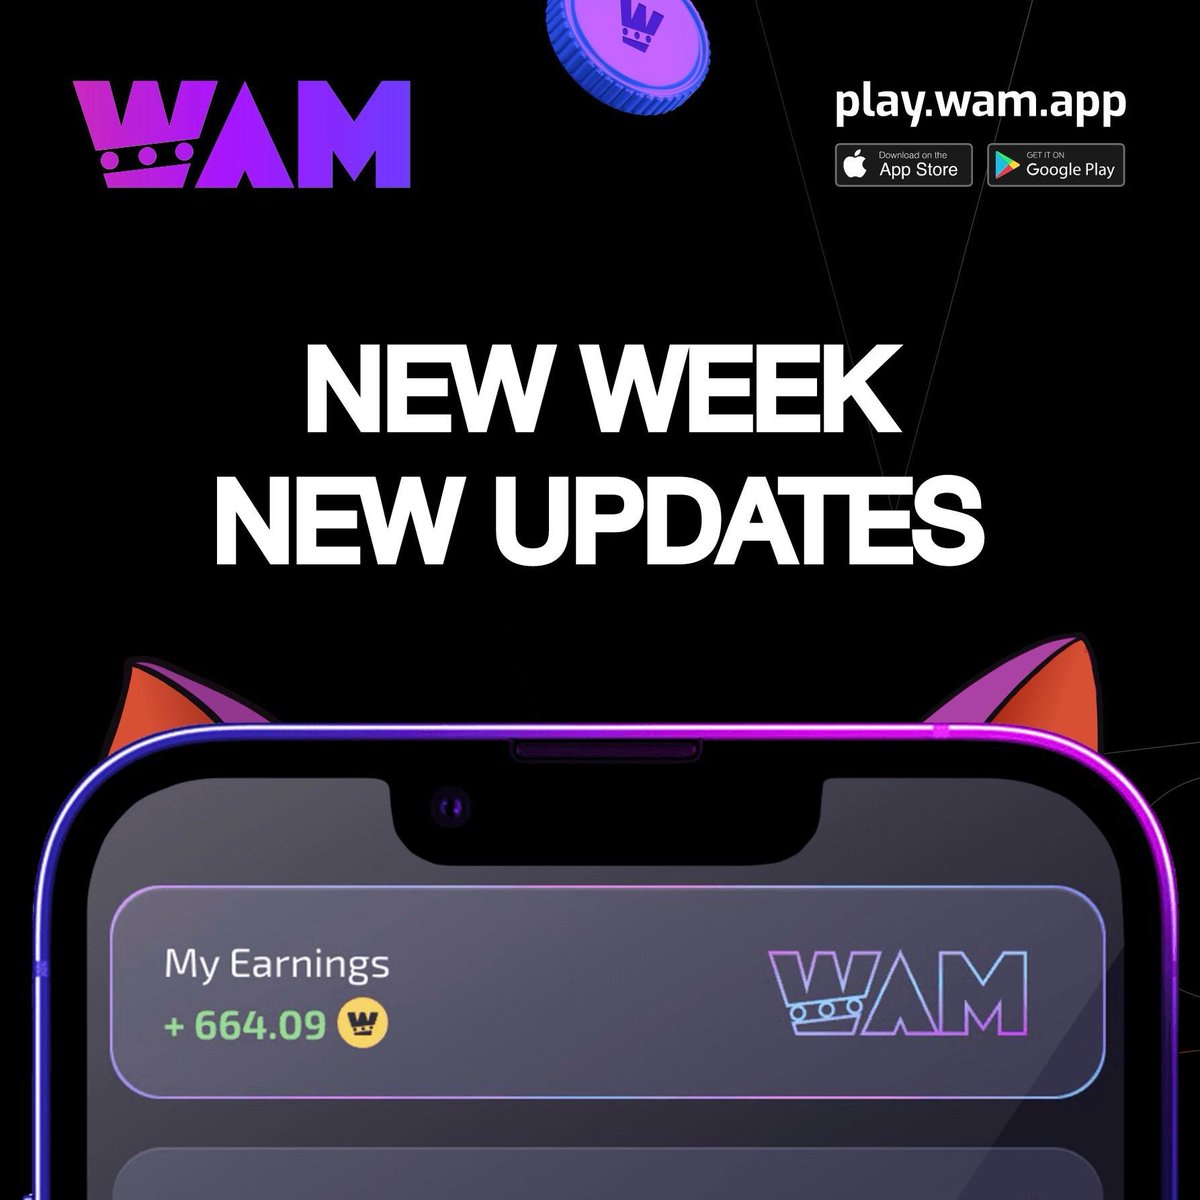 🚀 New Week ,New Reveals ! 🤘It will be a pivotal stepping stone for what's next in the $WAM ecosystem. 🌪️ #CryptoGaming is in its early stages and will impact how ppl perceive gaming. 🔥Movies will evolve into video games, while games will become smth unimaginable.